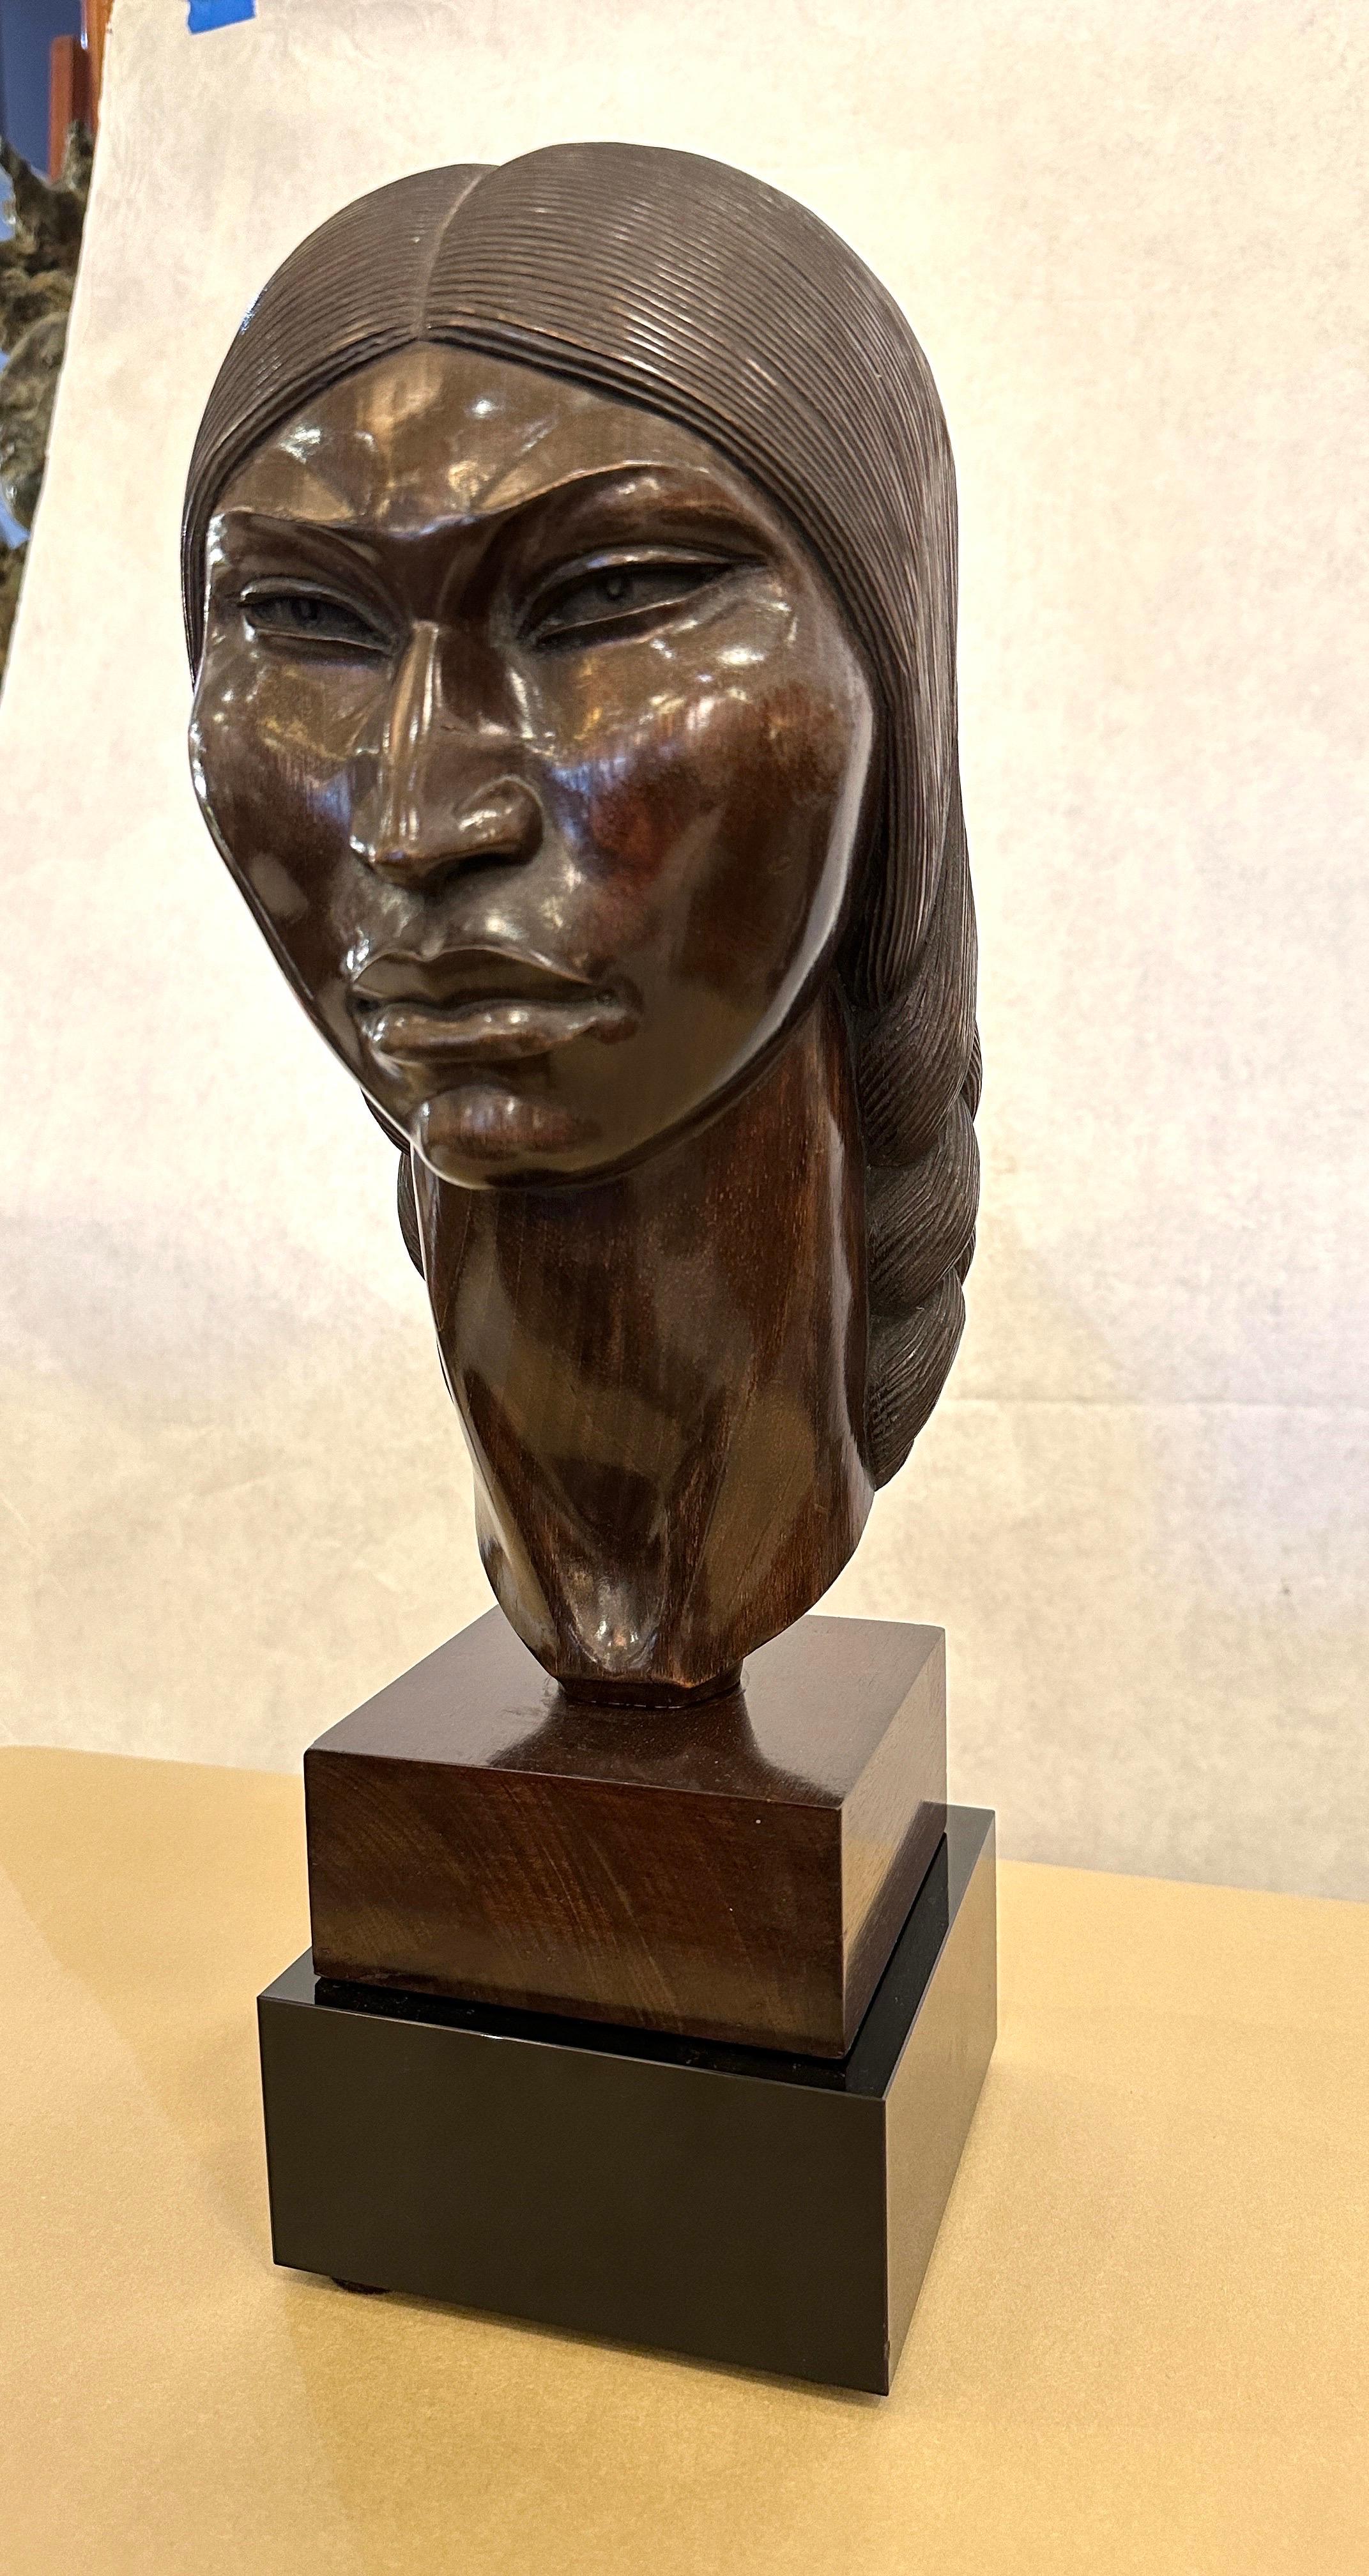 This beautifully and intricately carved vintage bust of an Incan warrior female by SARAVIA. This wonderful dark wood sits atop a custom created black glass pedestal base (not attached). The features of the face and hair are masterfully executed.